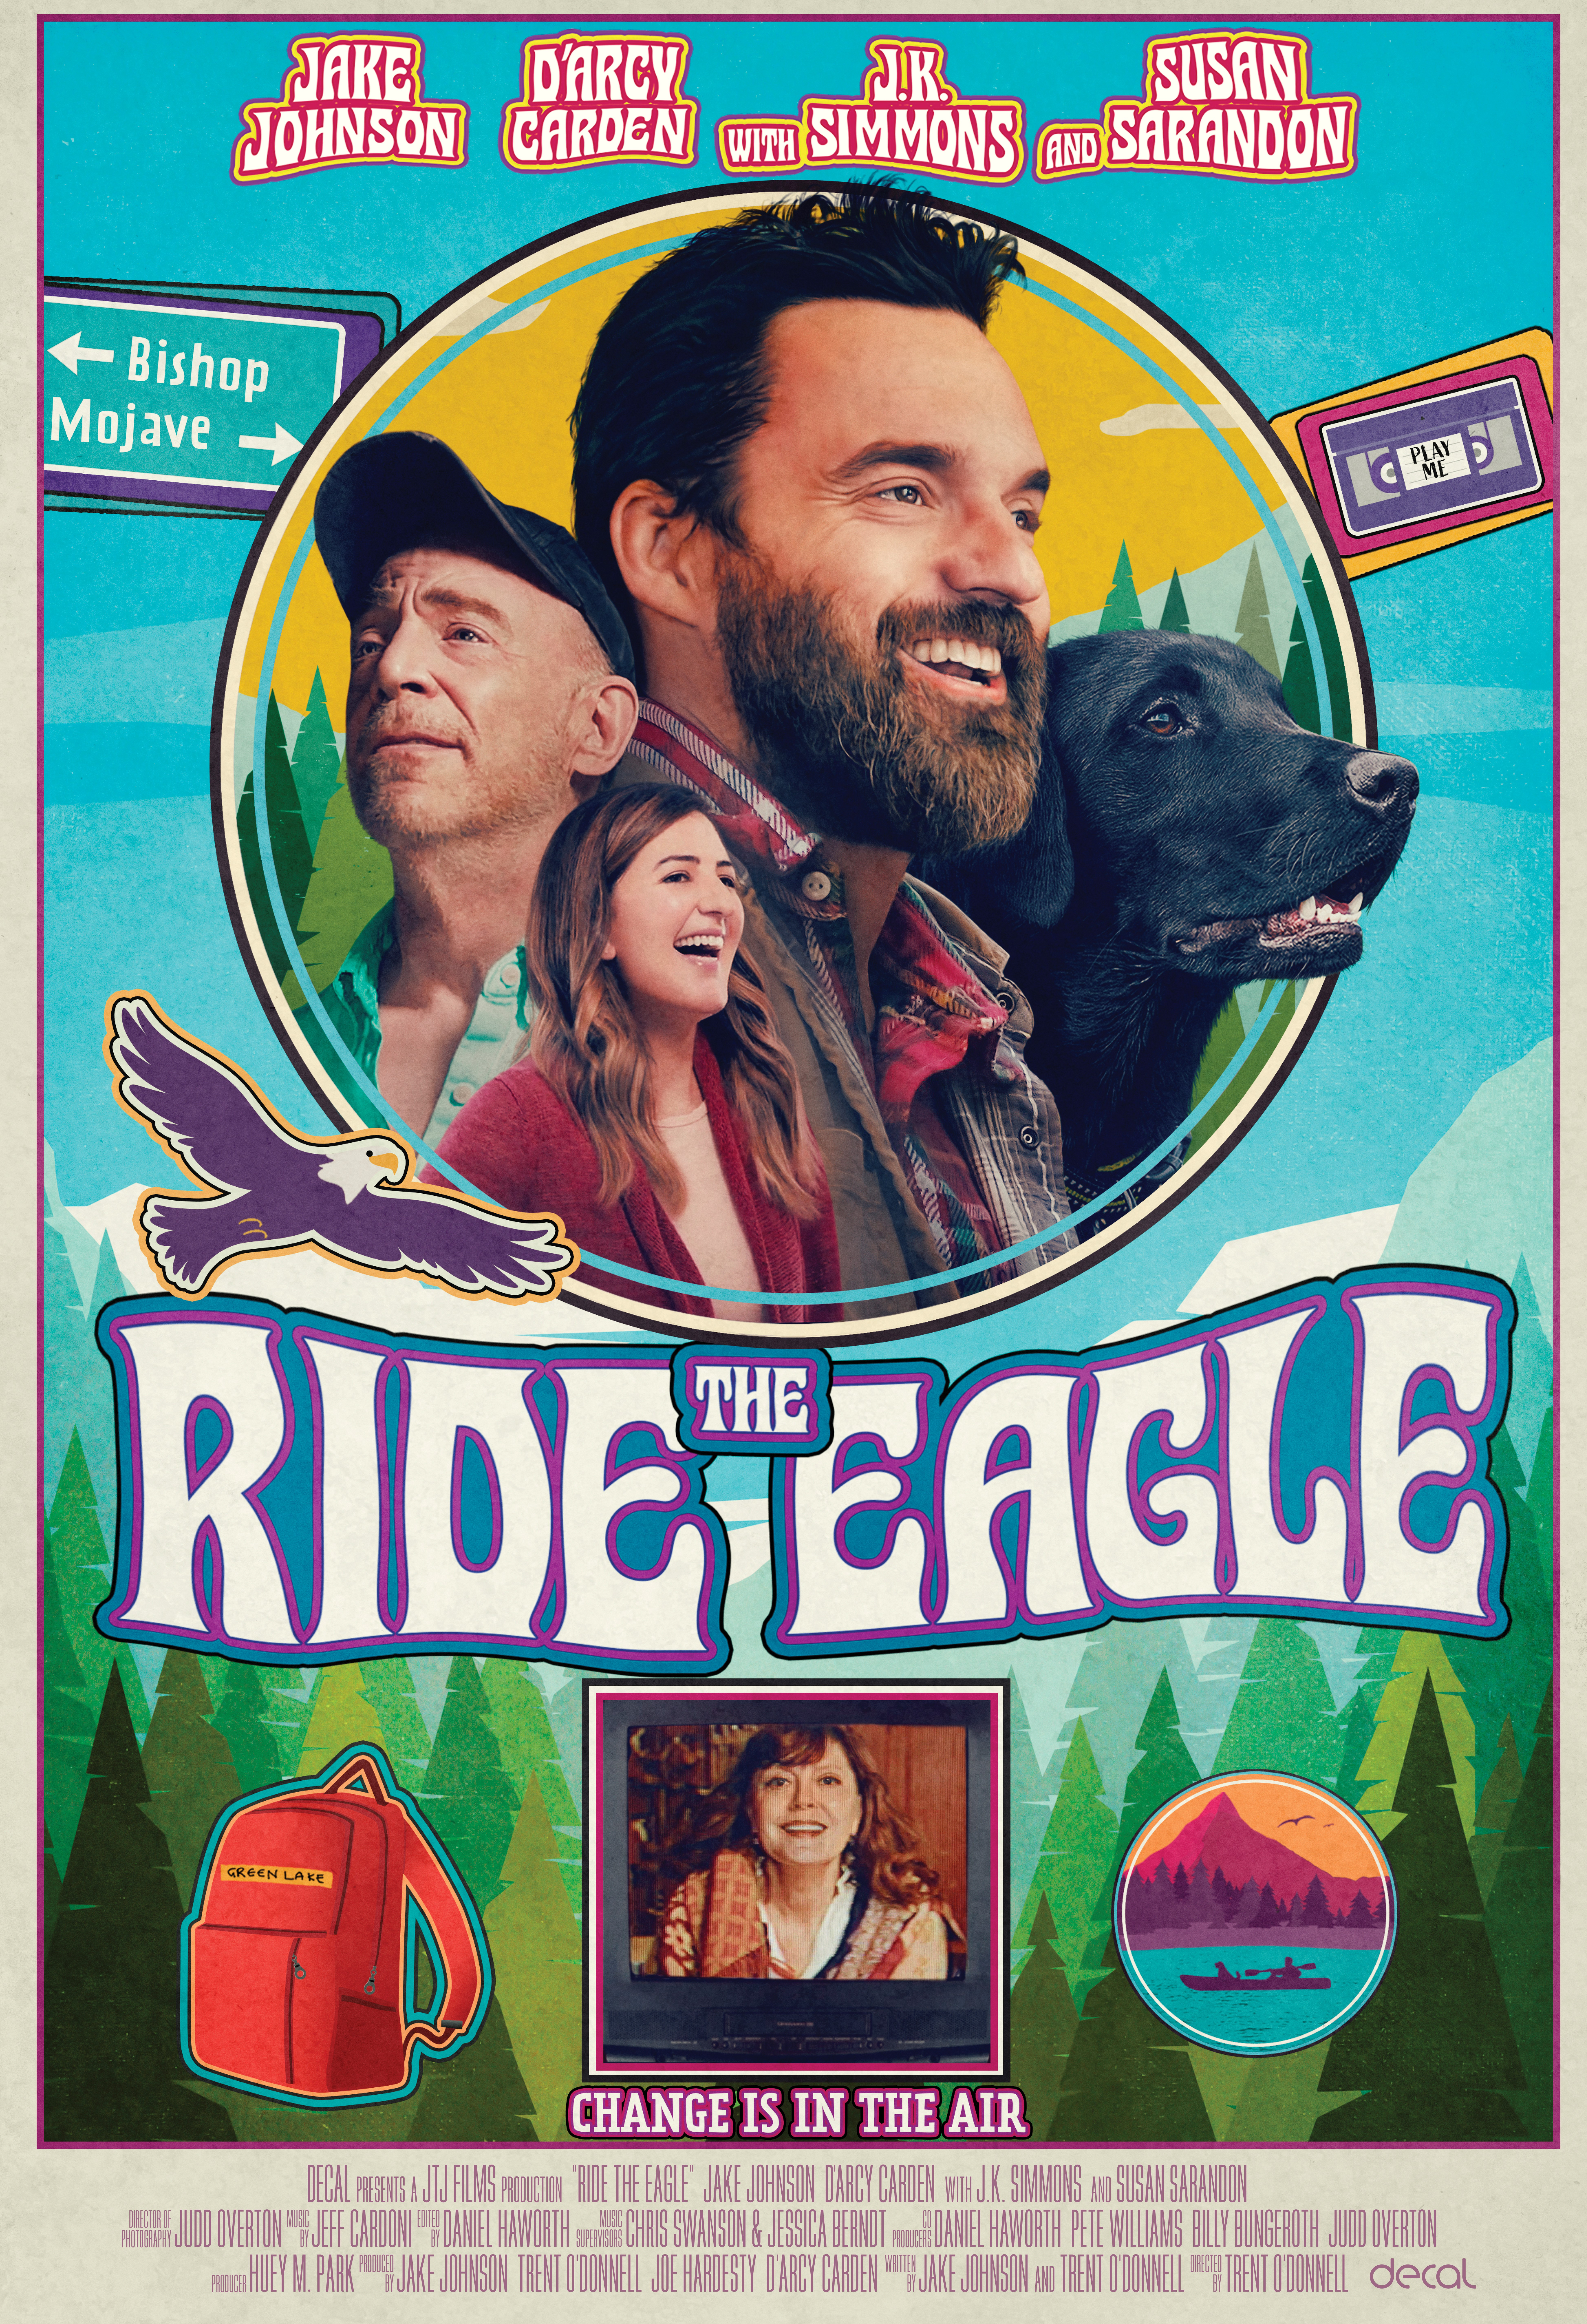 Ride the Eagle Poster